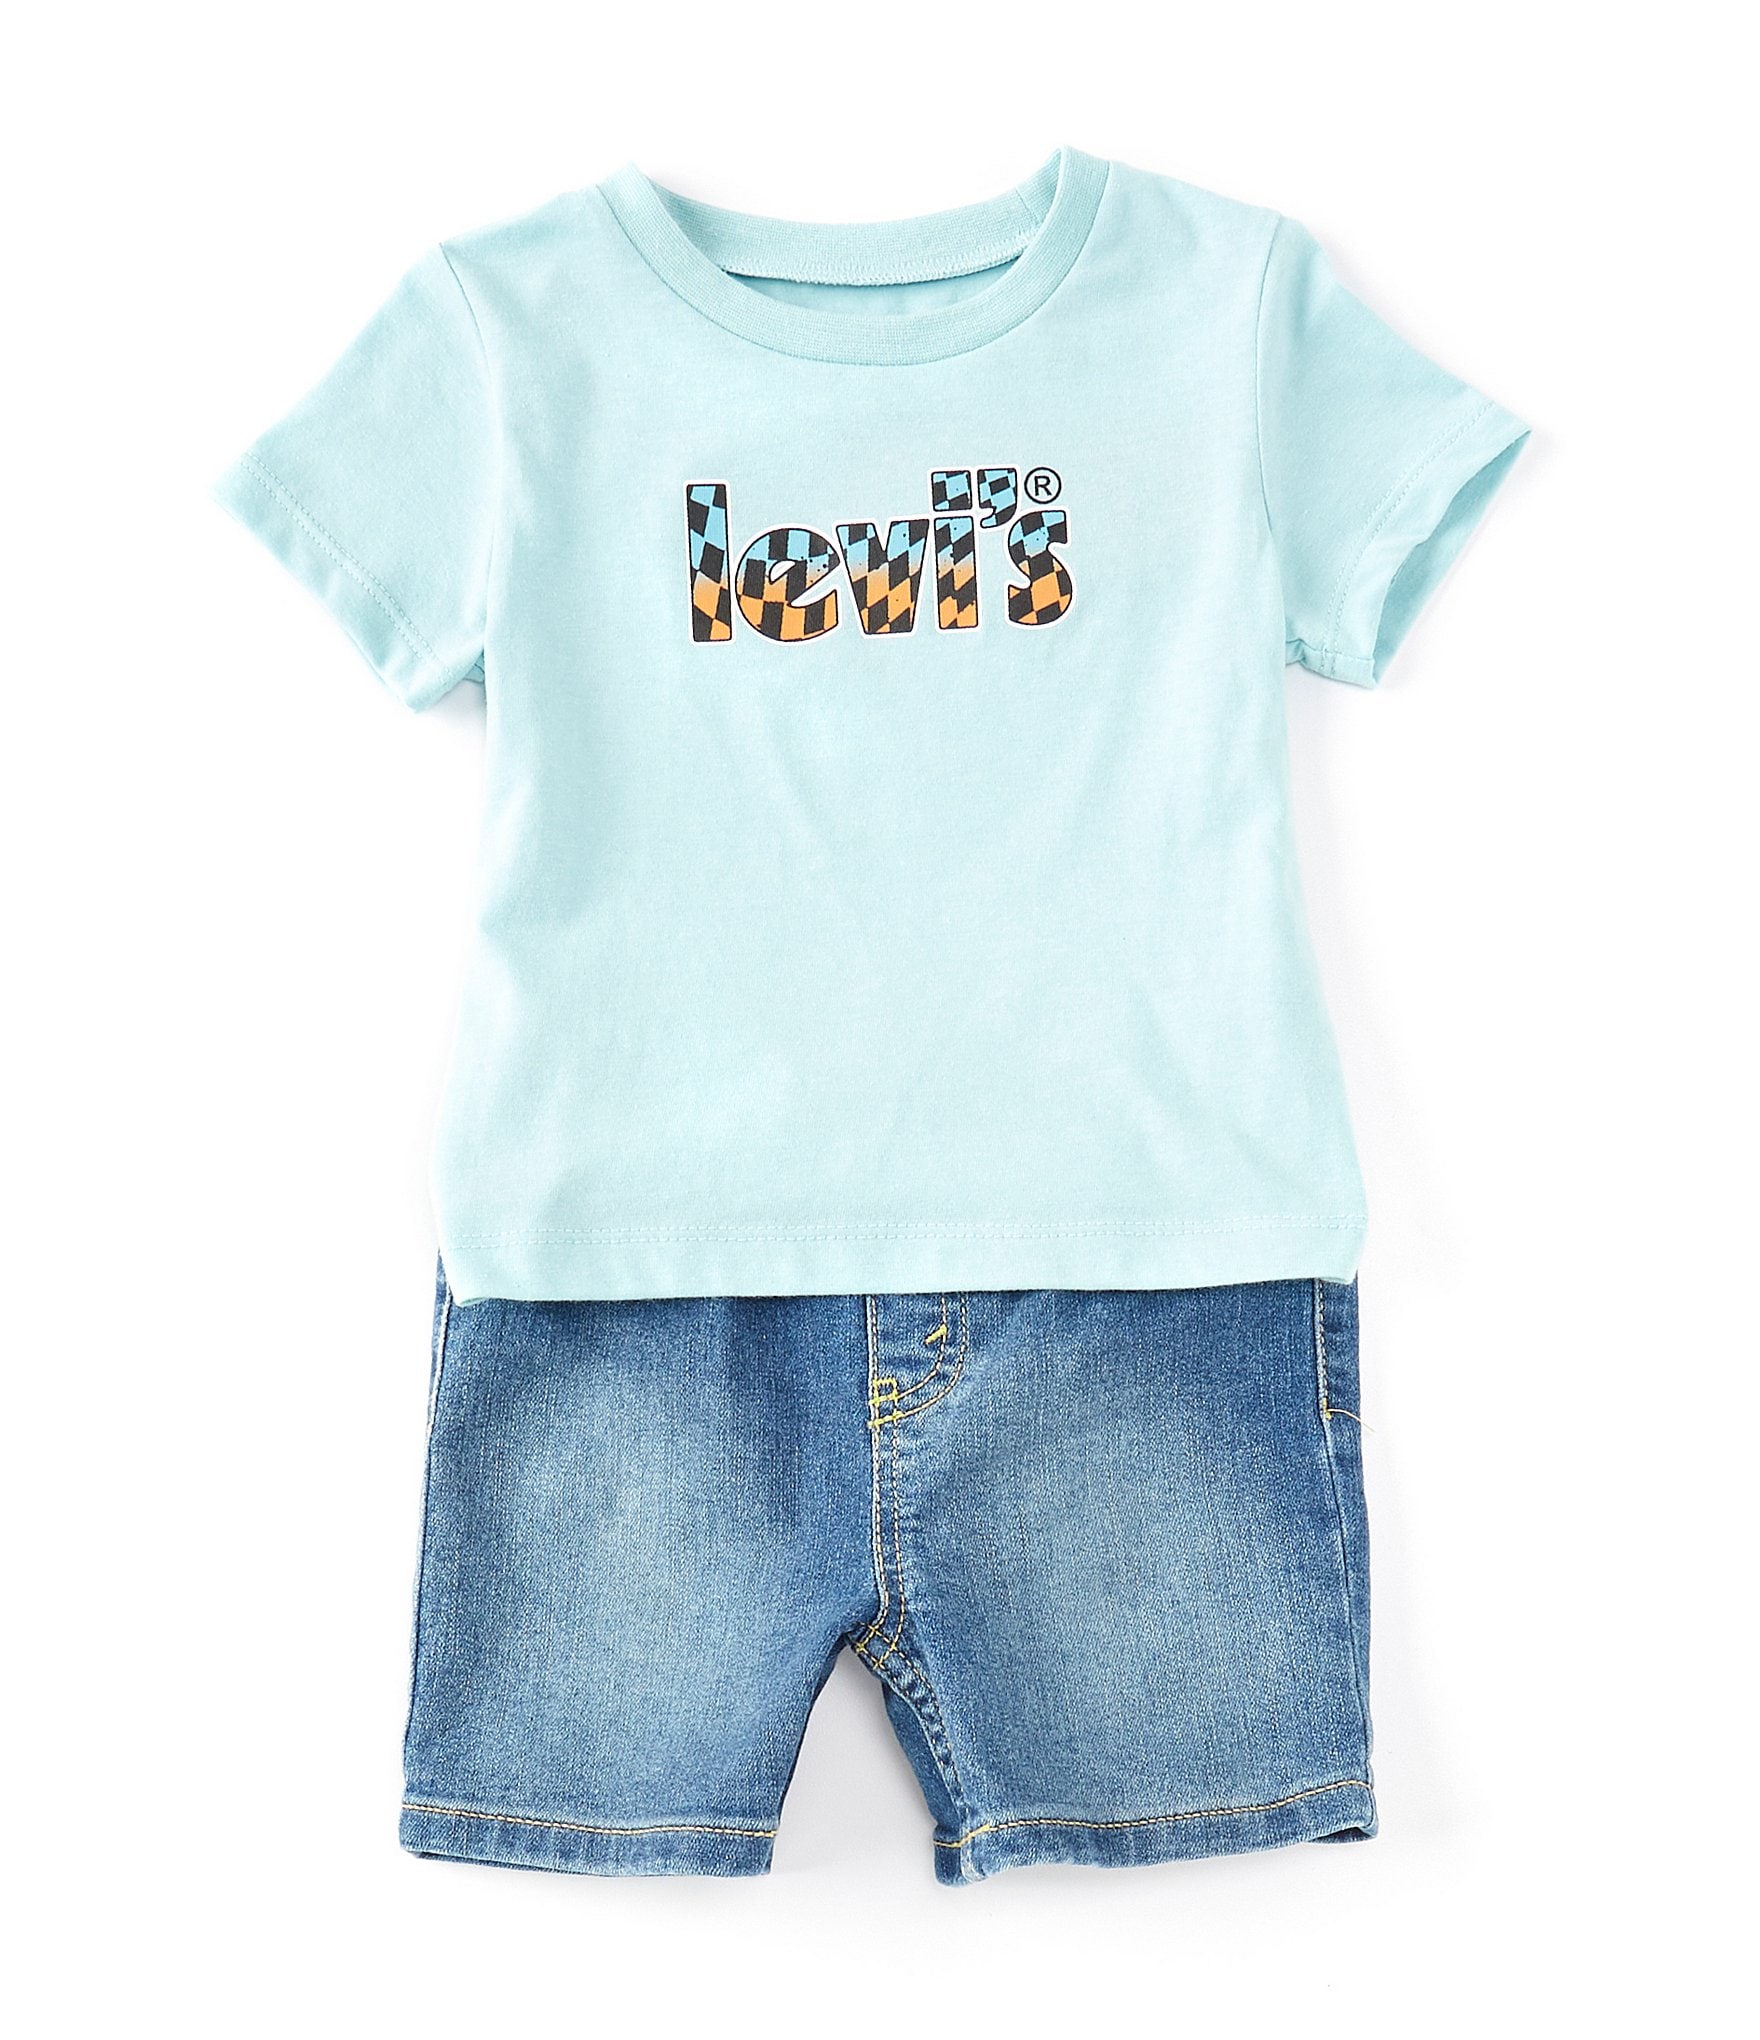  Levi's Baby Boys' Graphic T-Shirt and Overalls 2-Piece